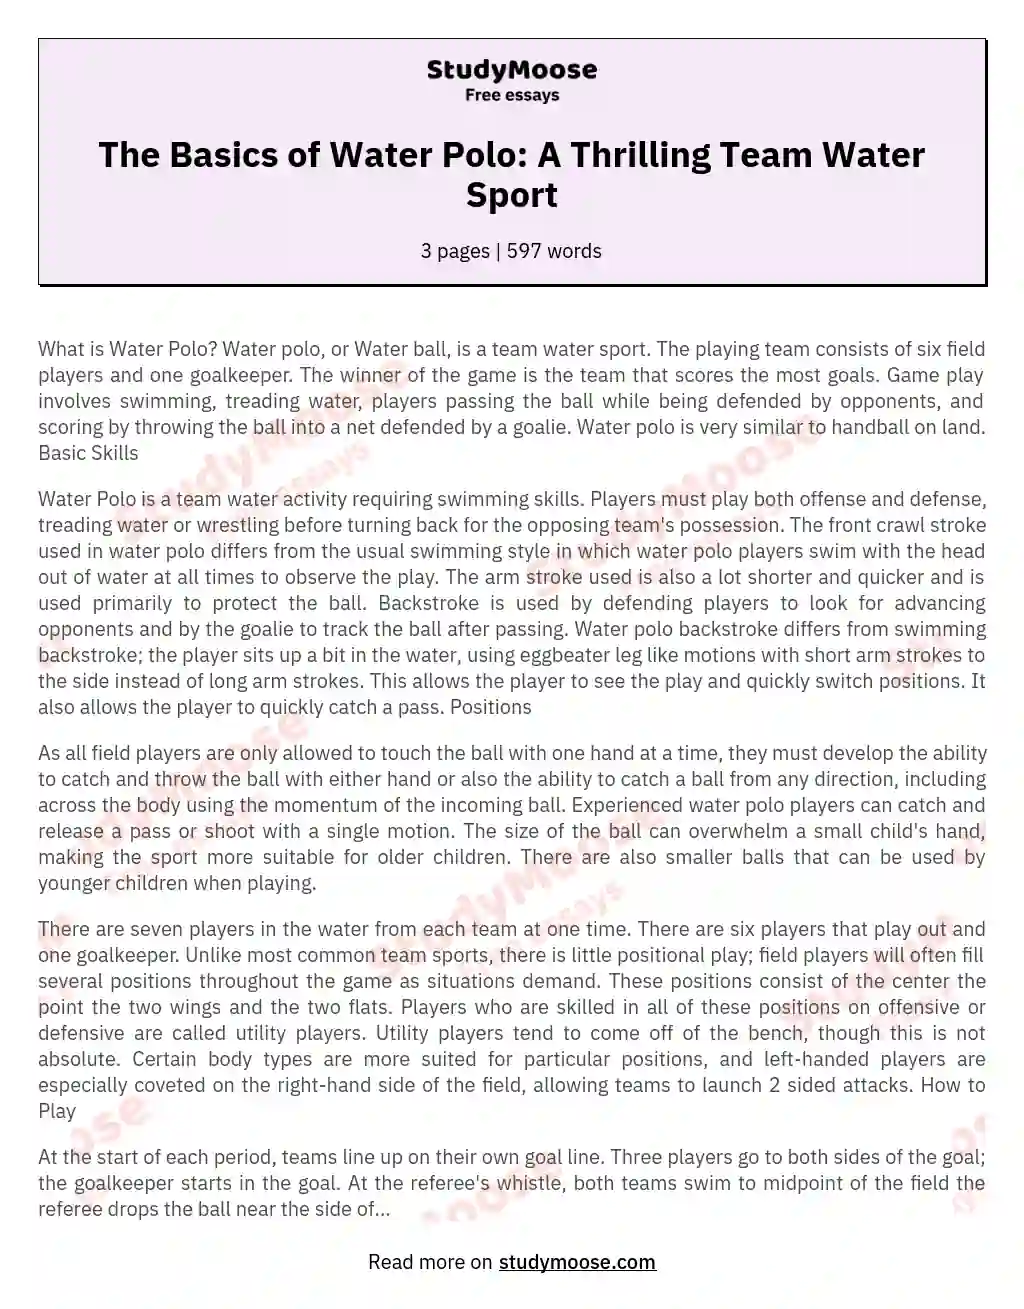 essay on water polo